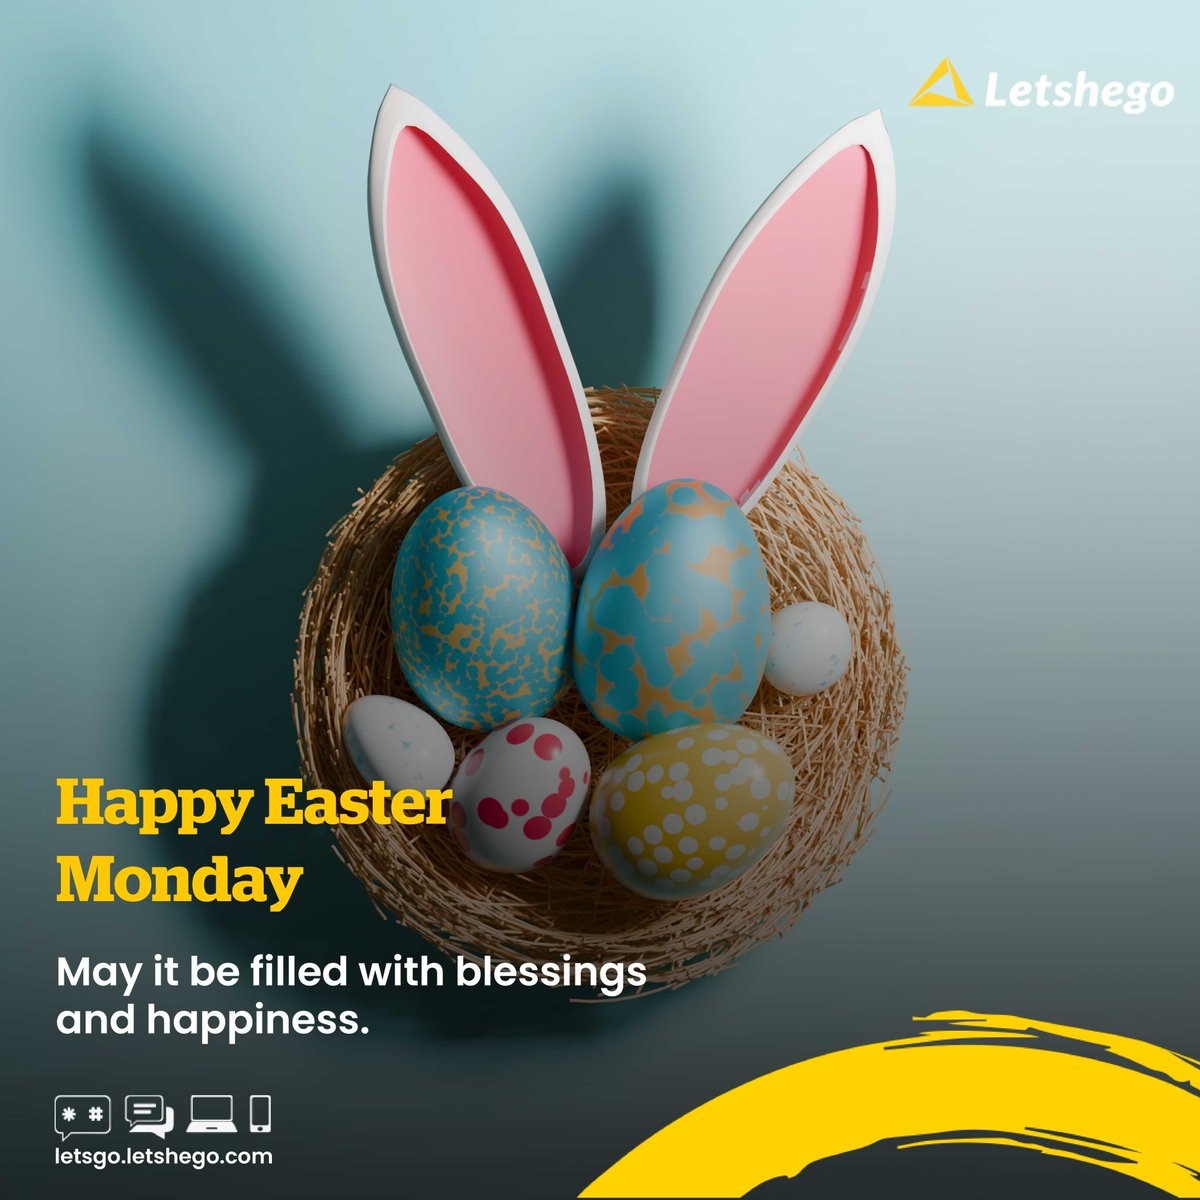 Happy Easter Monday🌷 Cheers to making the most of the long weekend with family and friends. May this day be filled with happiness. #NewMonth #HappyEasterMonday #Letshego